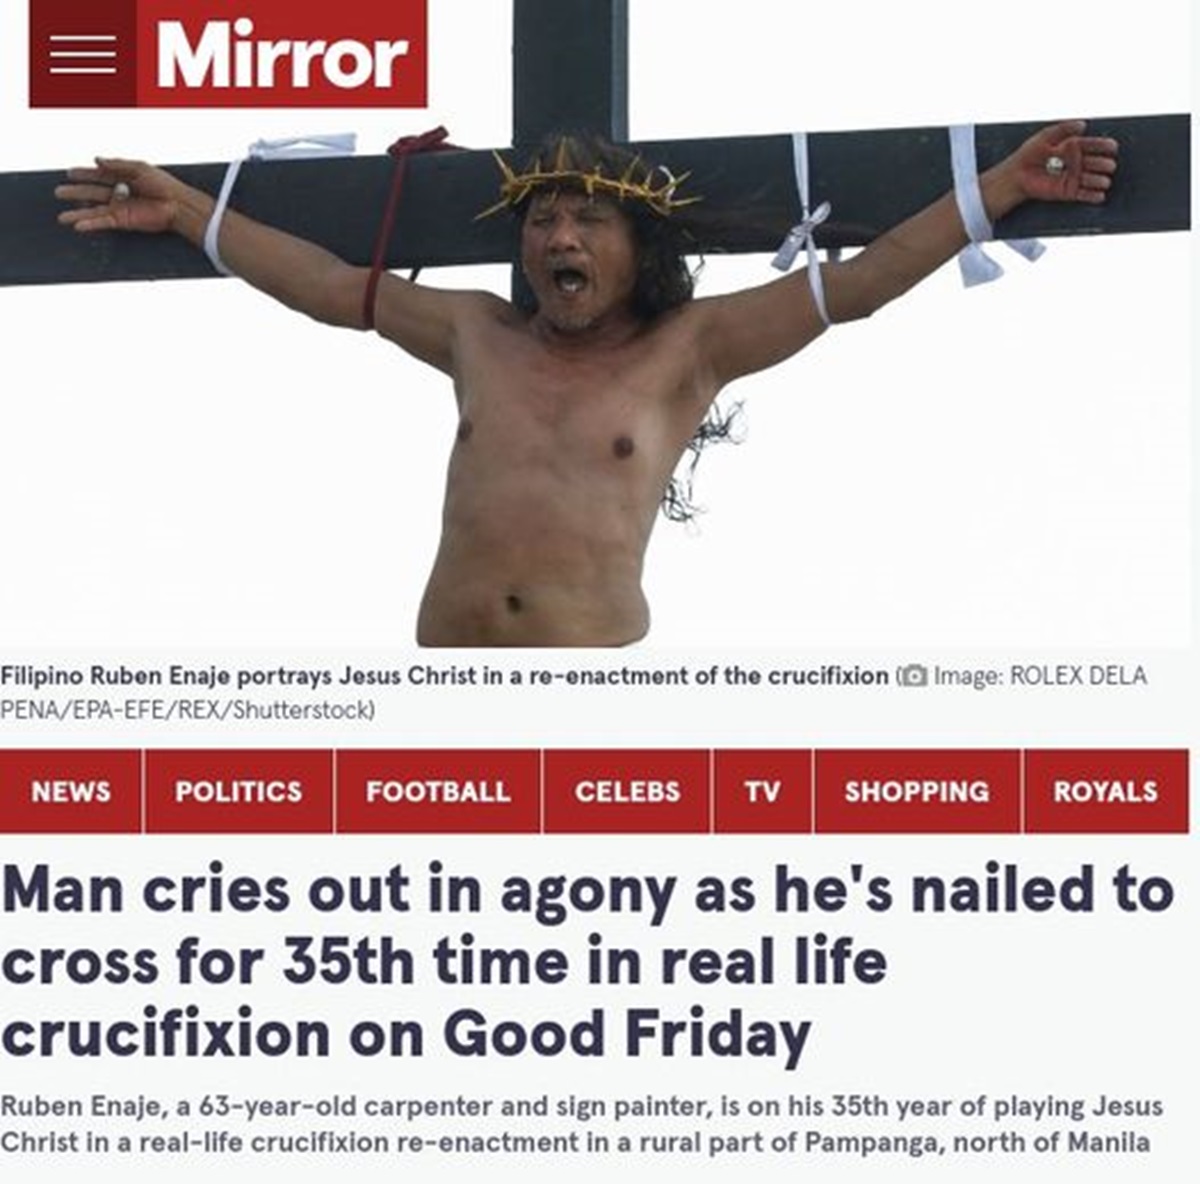 crucifix - ||| Mirror Filipino Ruben Enaje portrays Jesus Christ in a reenactment of the crucifixion Image Rolex Dela PenaEpaEfeRexShutterstock News Politics Football Celebs Tv Shopping Royals Man cries out in agony as he's nailed to cross for 35th time i